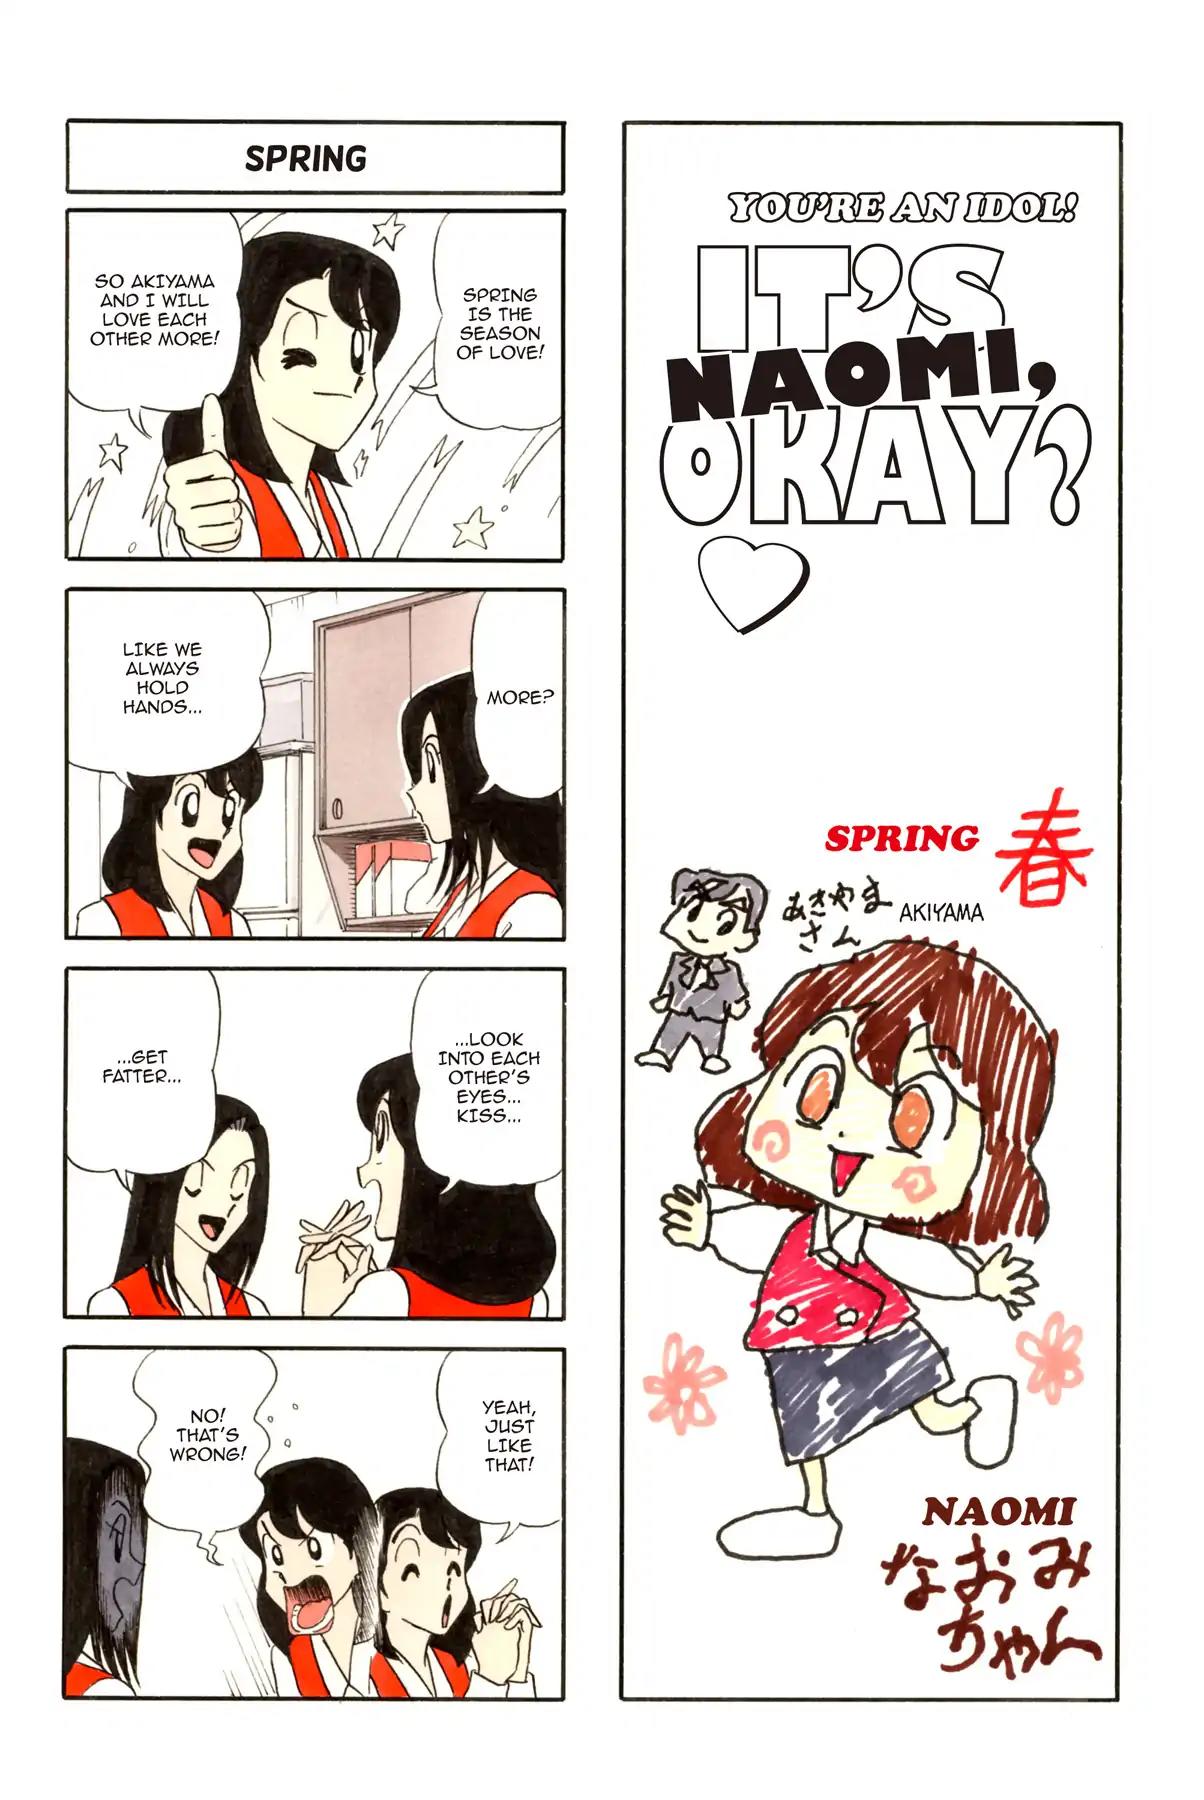 It's Naomi, Okay? After 16 Vol 1 Chapter 28